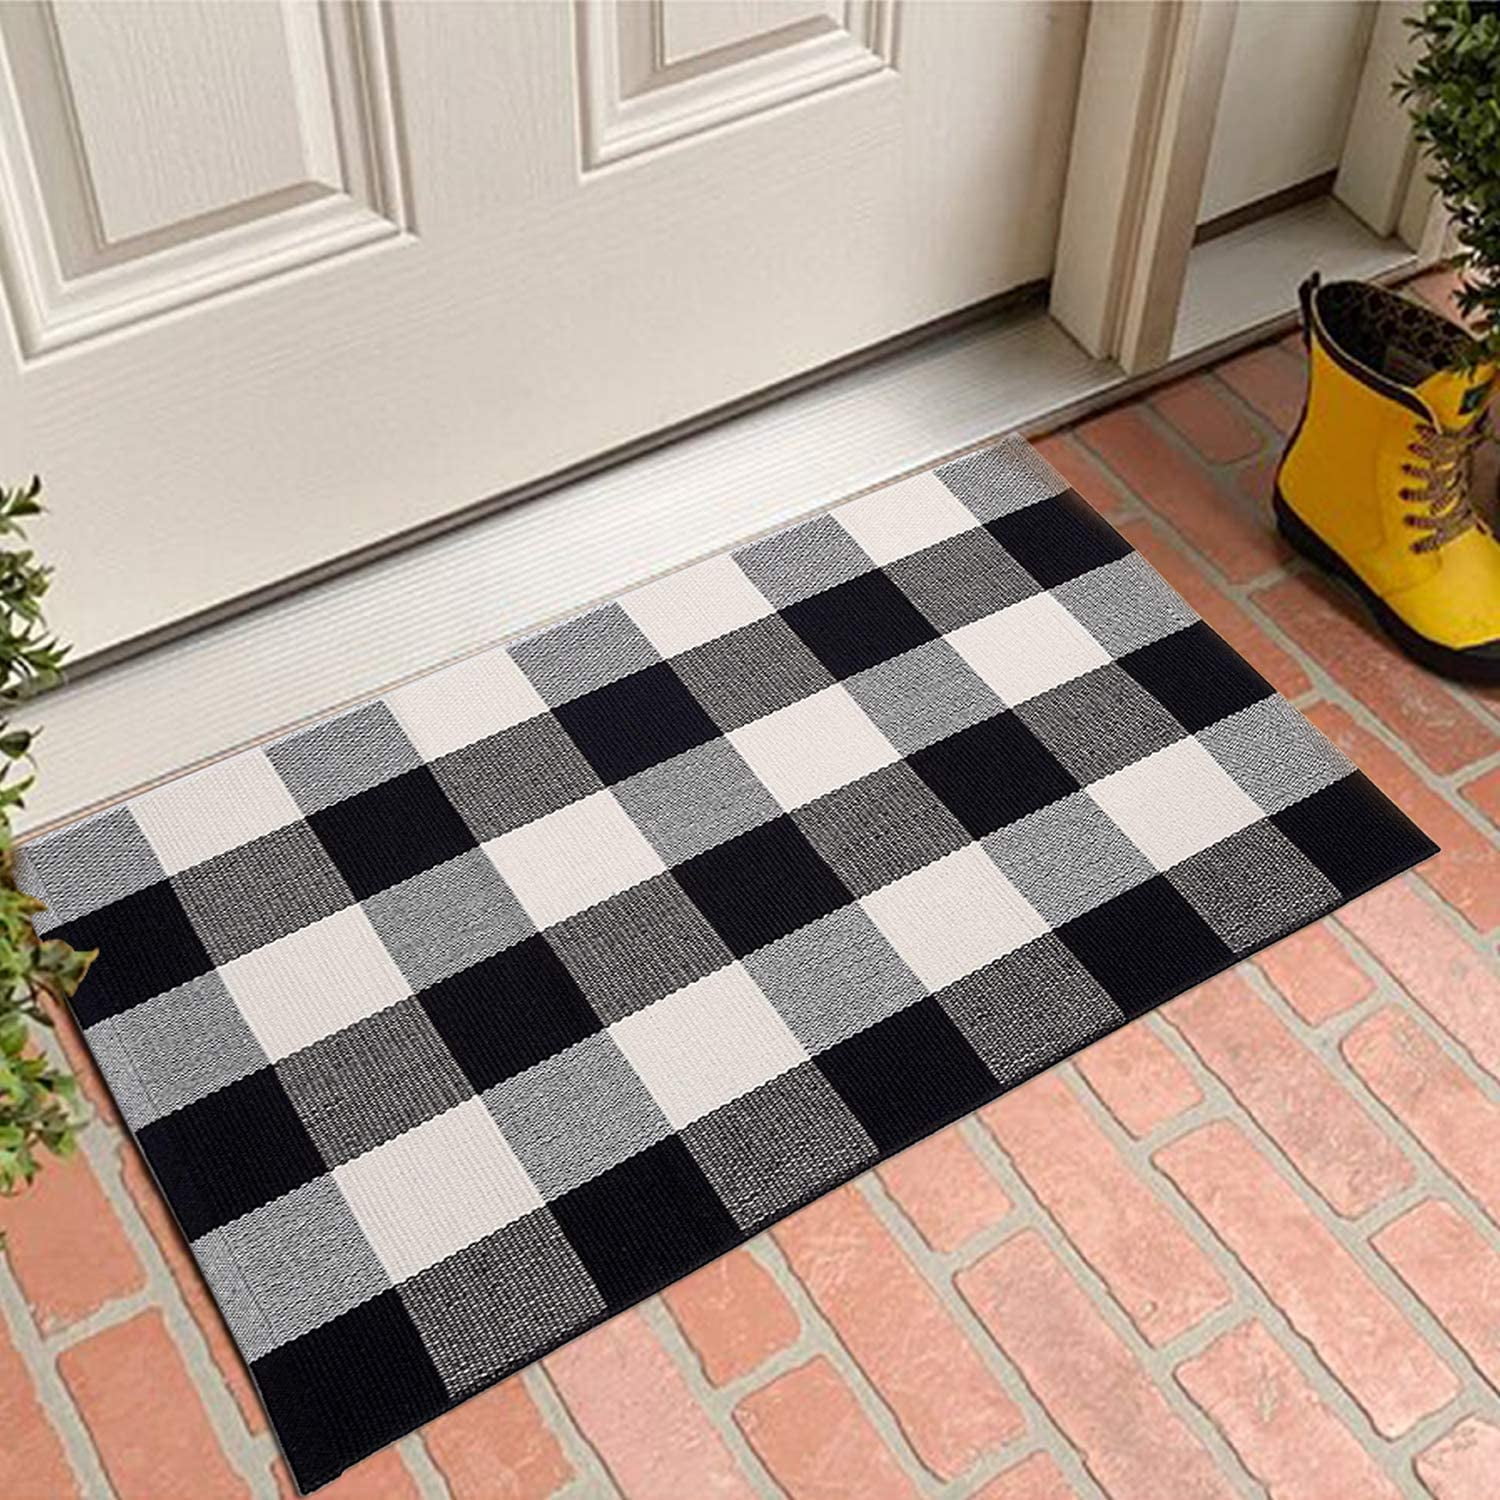 Pk Ztopia Buffalo Plaid Rug 23 6 X 35 4 Inches Check Black And White Checked Hand Woven Indoor Washable Entryway Front Porch Decor Rugs For Layered Welcome Door Mats Com